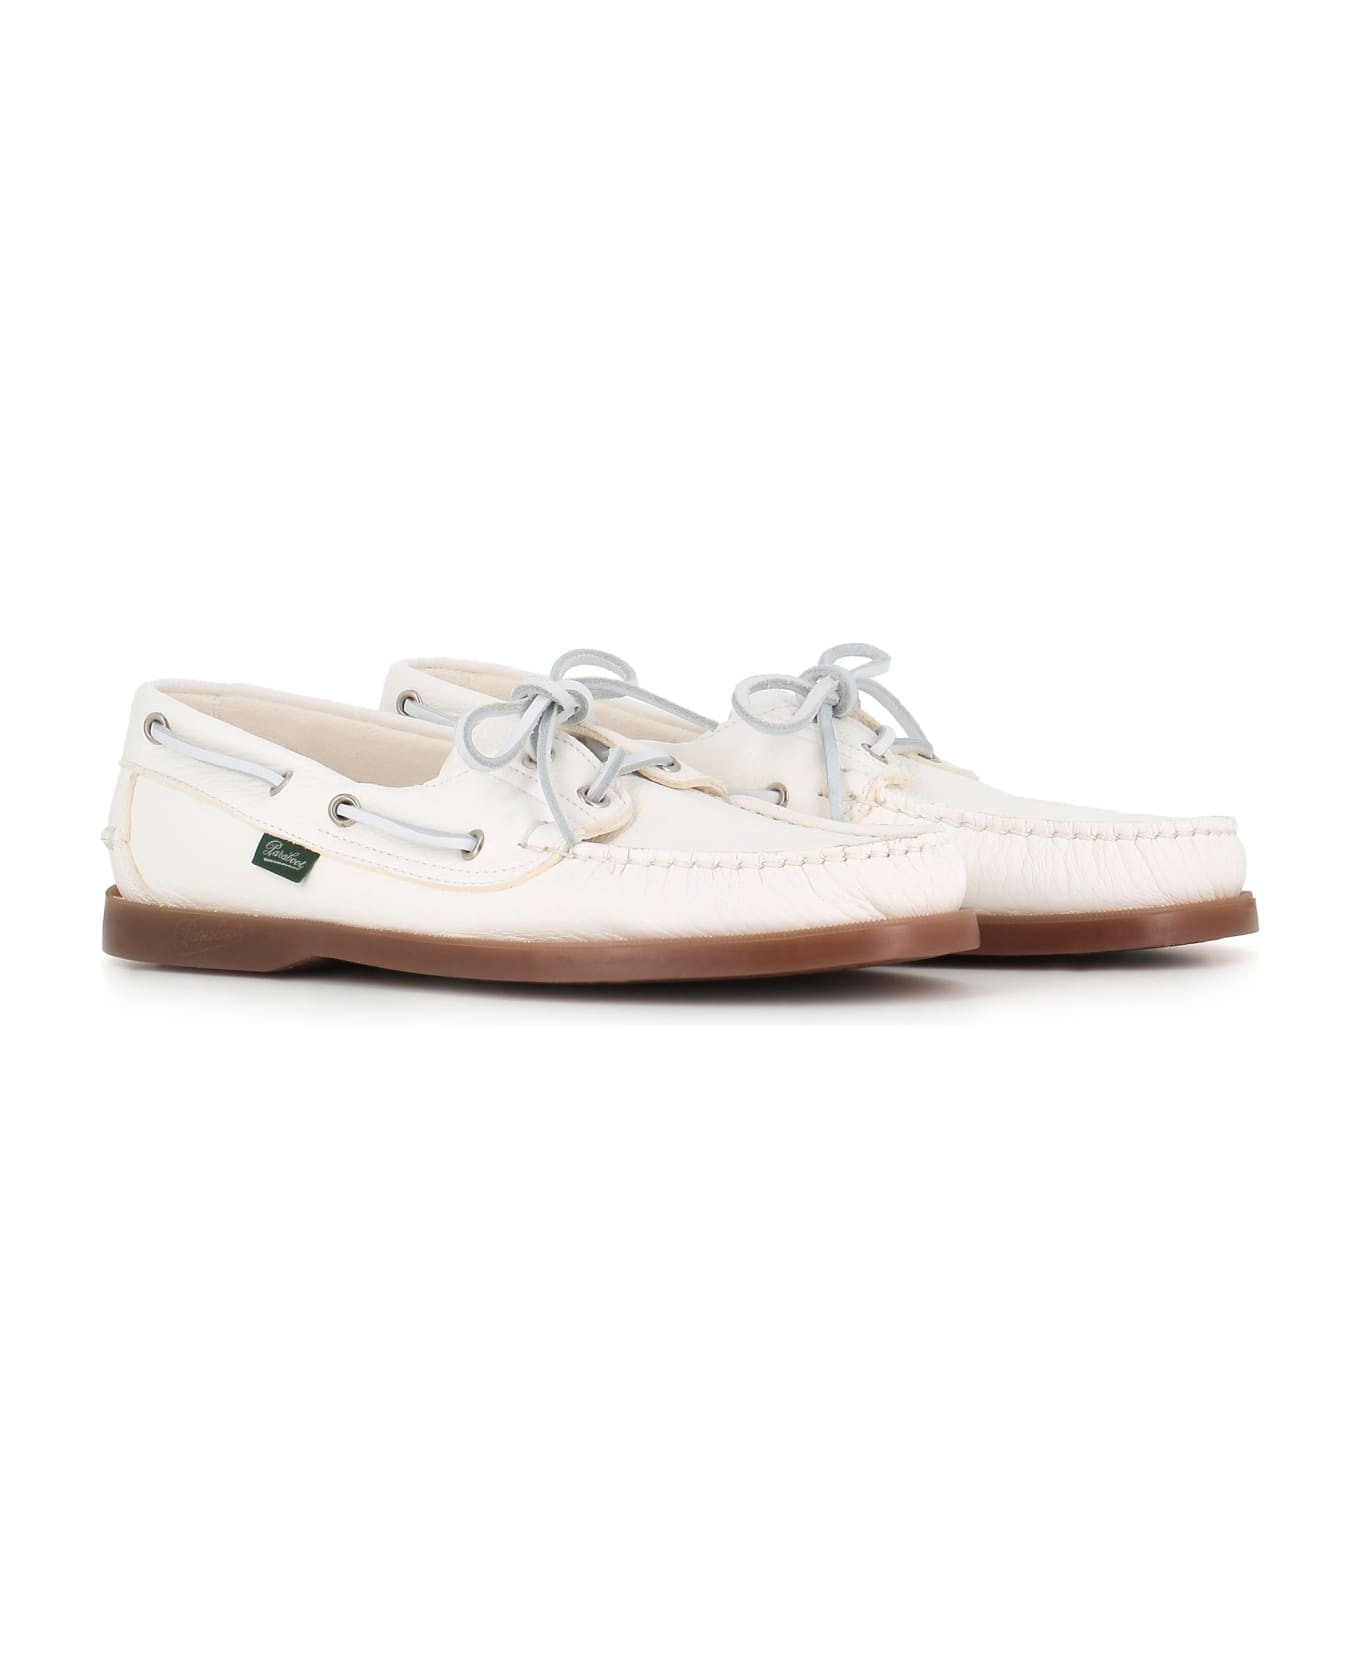 Paraboot Loafer Barth - White